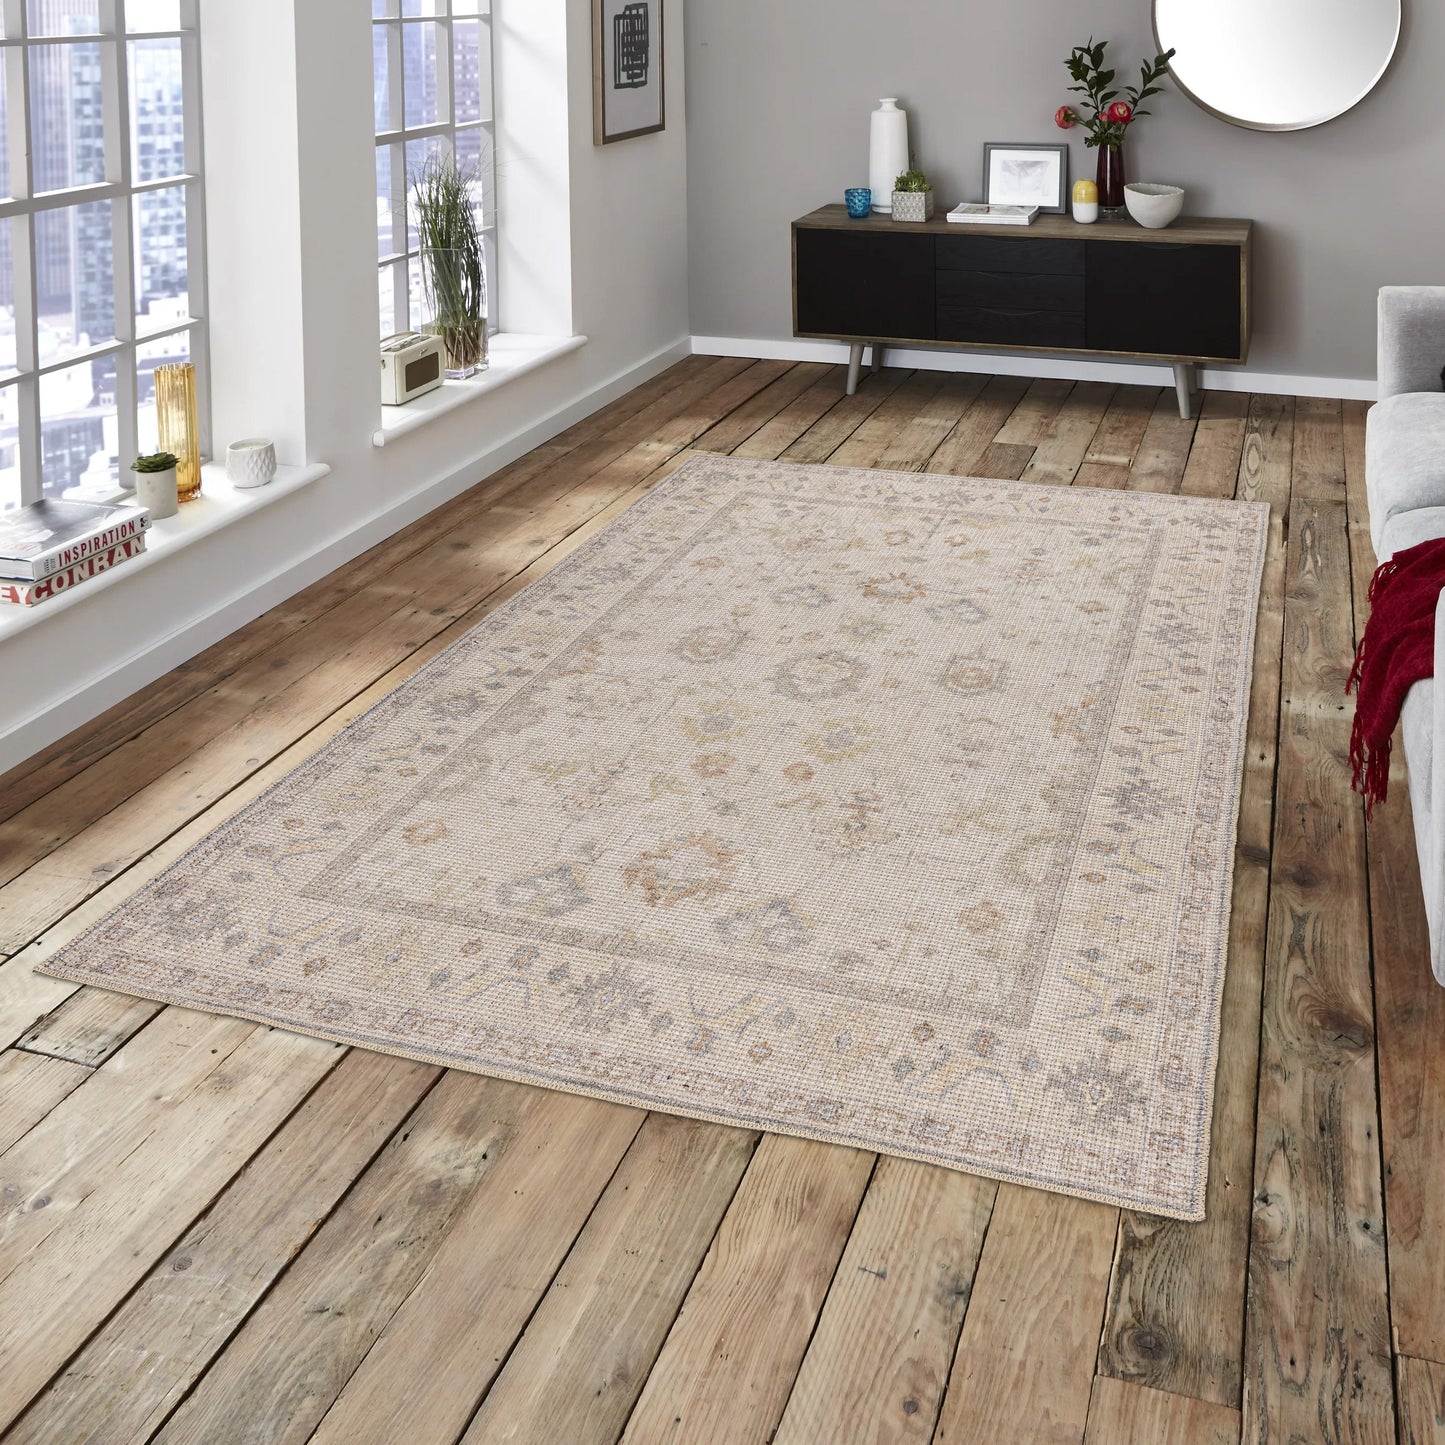 brown boho cotton and polyster machine washable traditional rustic area rug 6x8, 6x9 ft Living Room, Bedroom, Dining Area, Kitchen Carpet